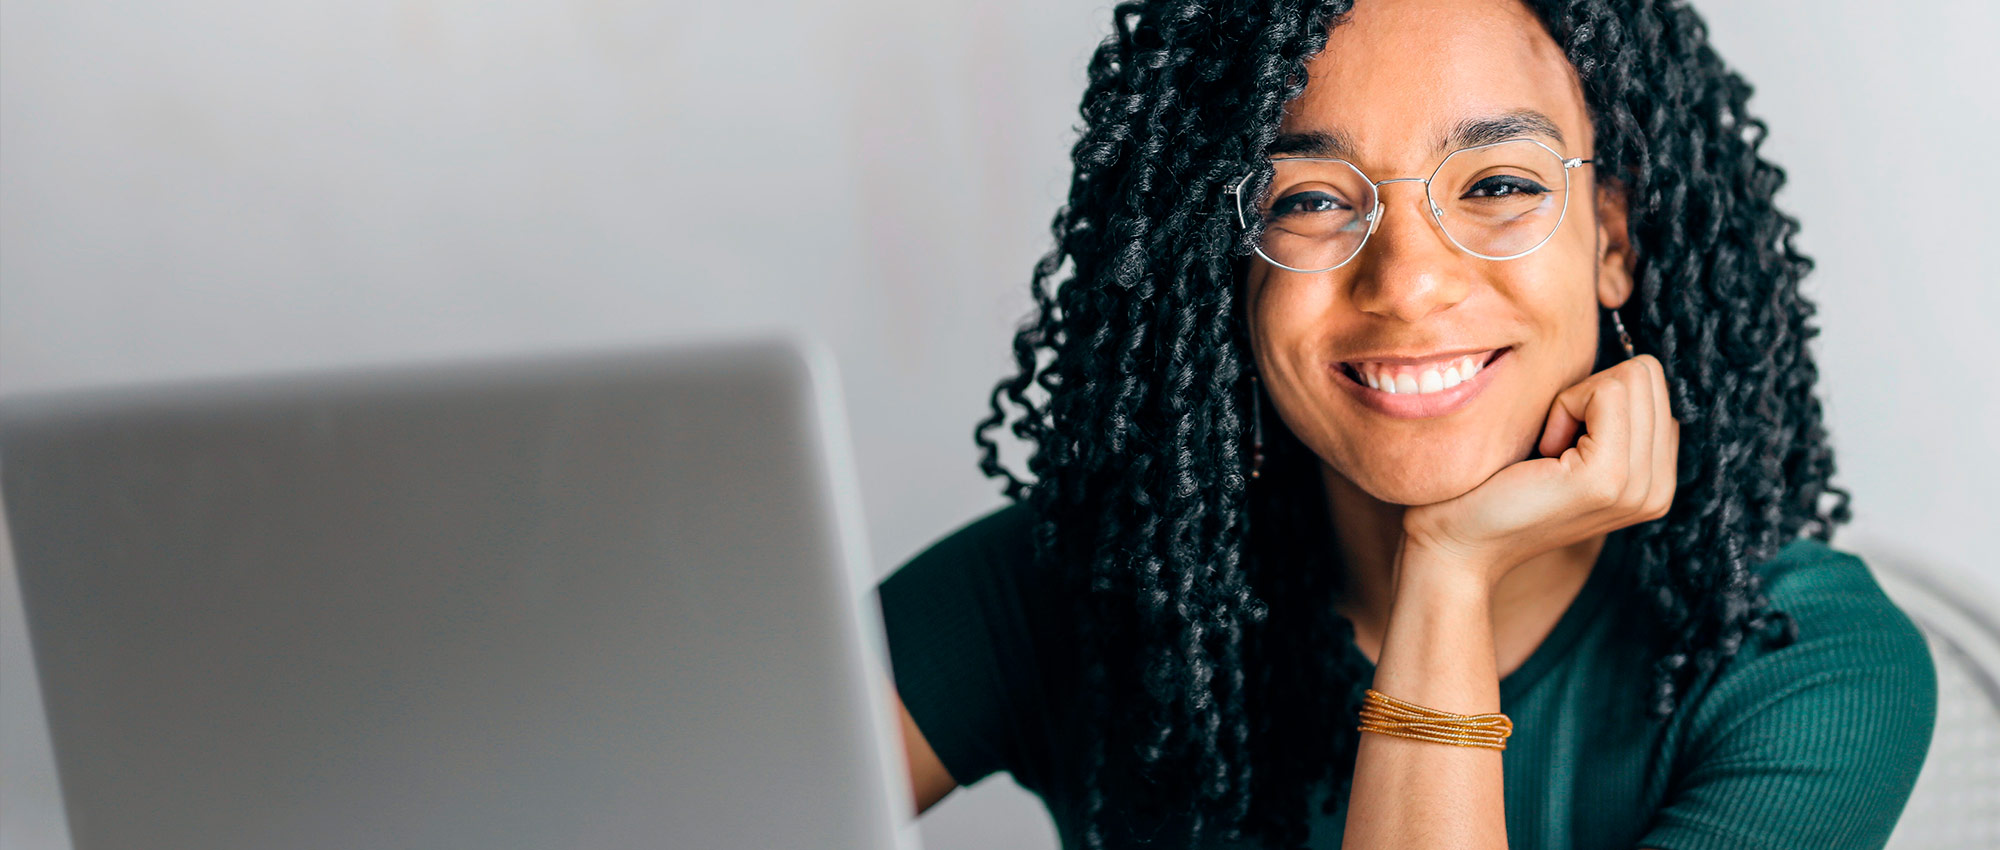 Young Black woman smiling while on her laptop